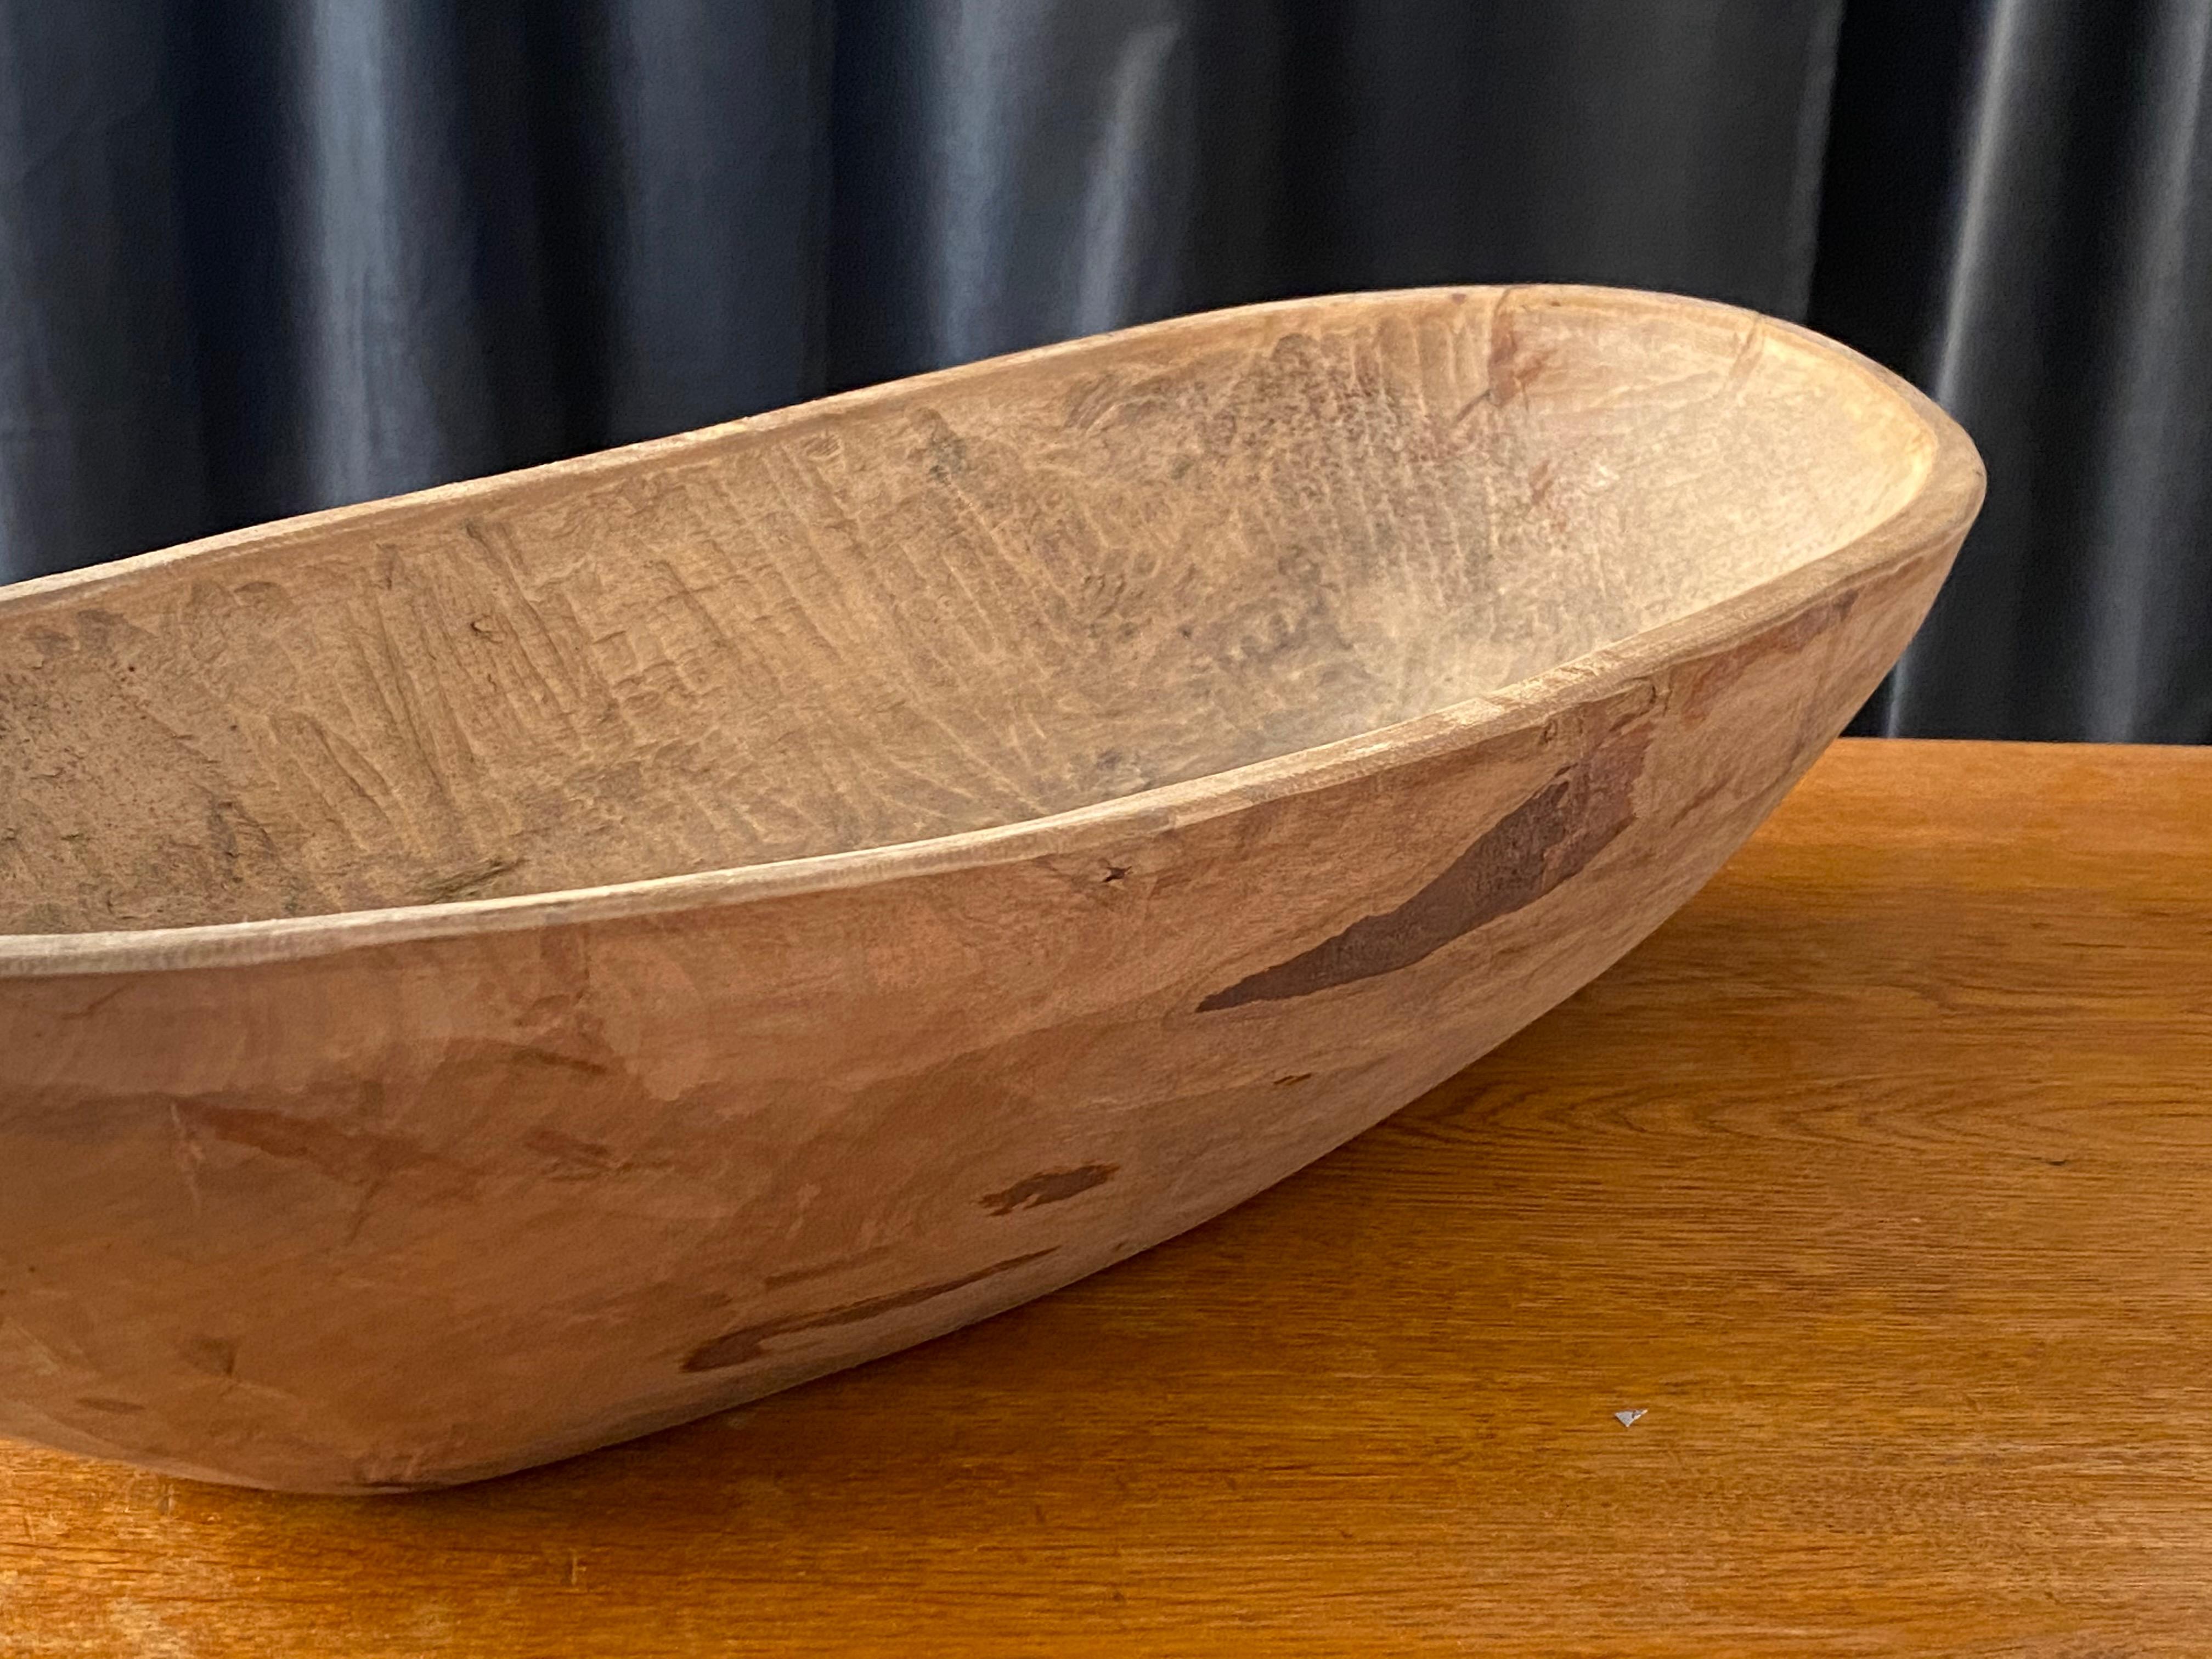 Early 19th Century Swedish Folk Art, Unique Large 18th Century Farmers Bowl, Wood, Signed and Dated